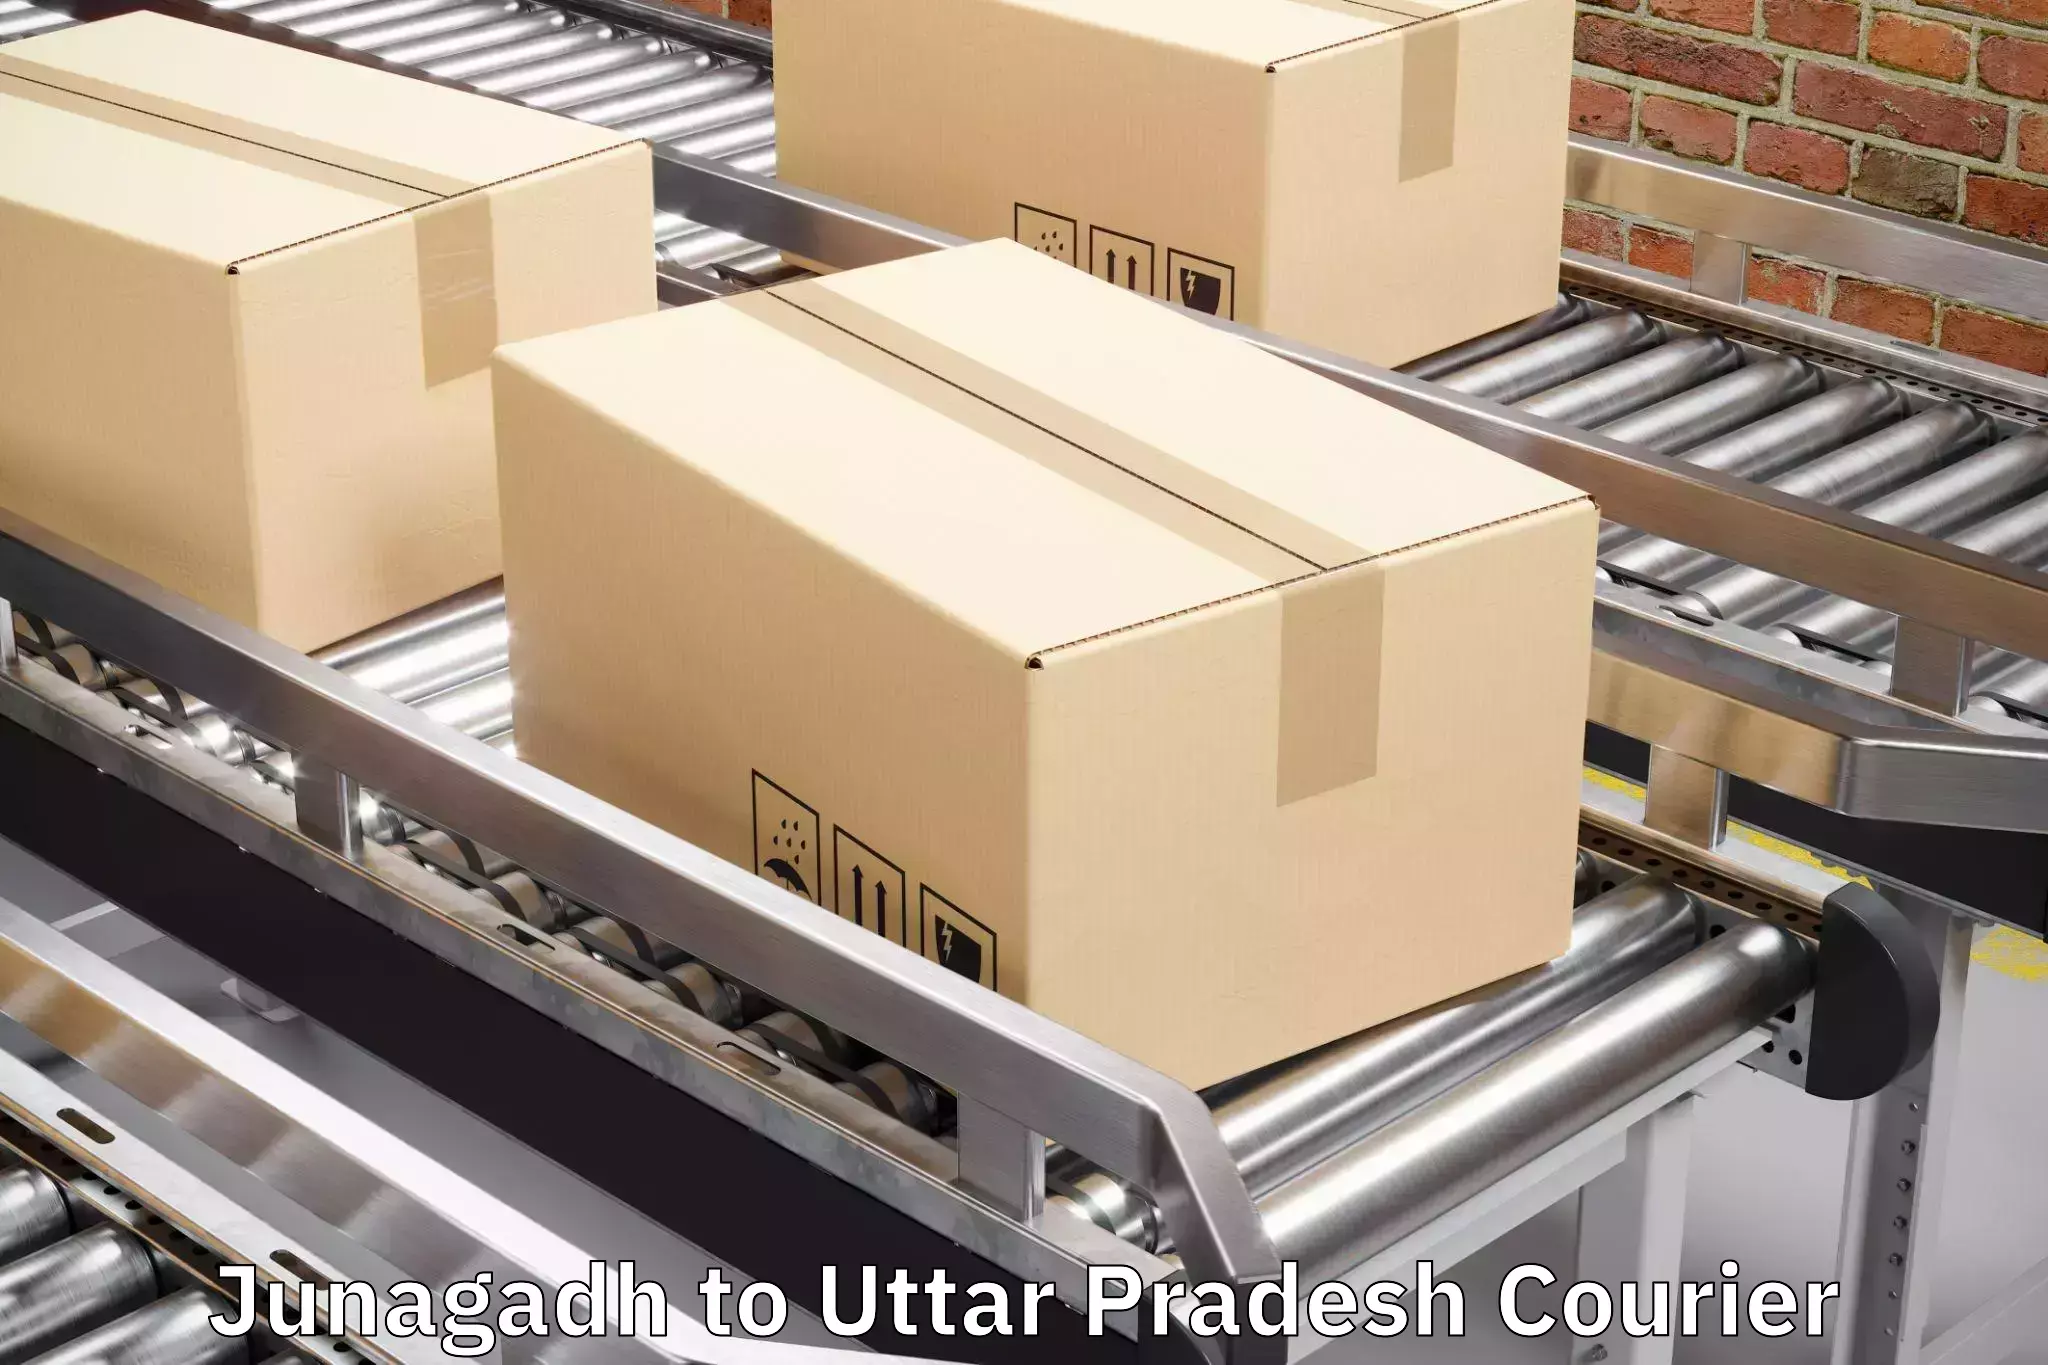 Luggage delivery logistics in Junagadh to Vrindavan